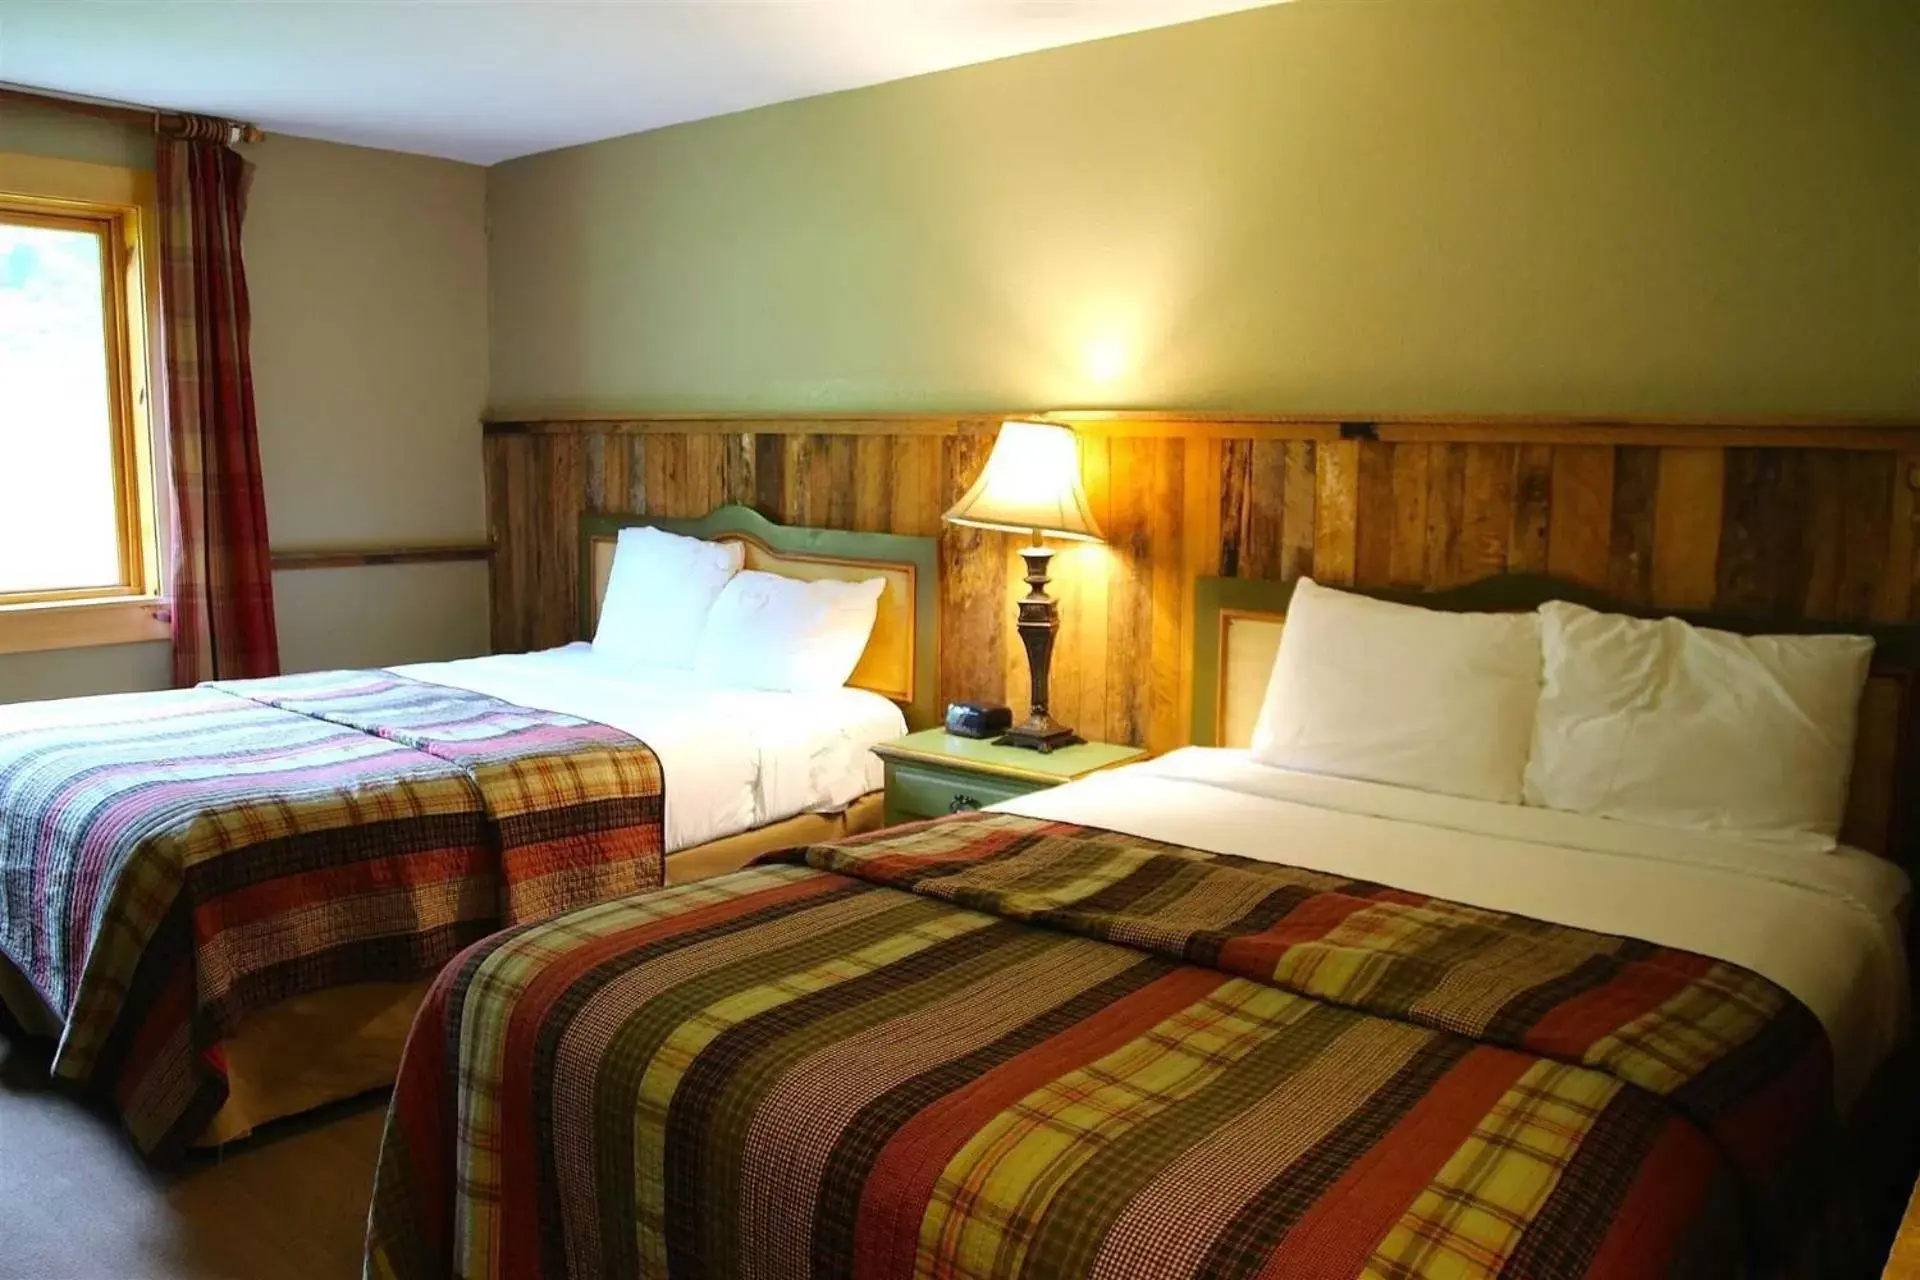 Deluxe Queen Room with Two Queen Beds in Northern Lights Lodge